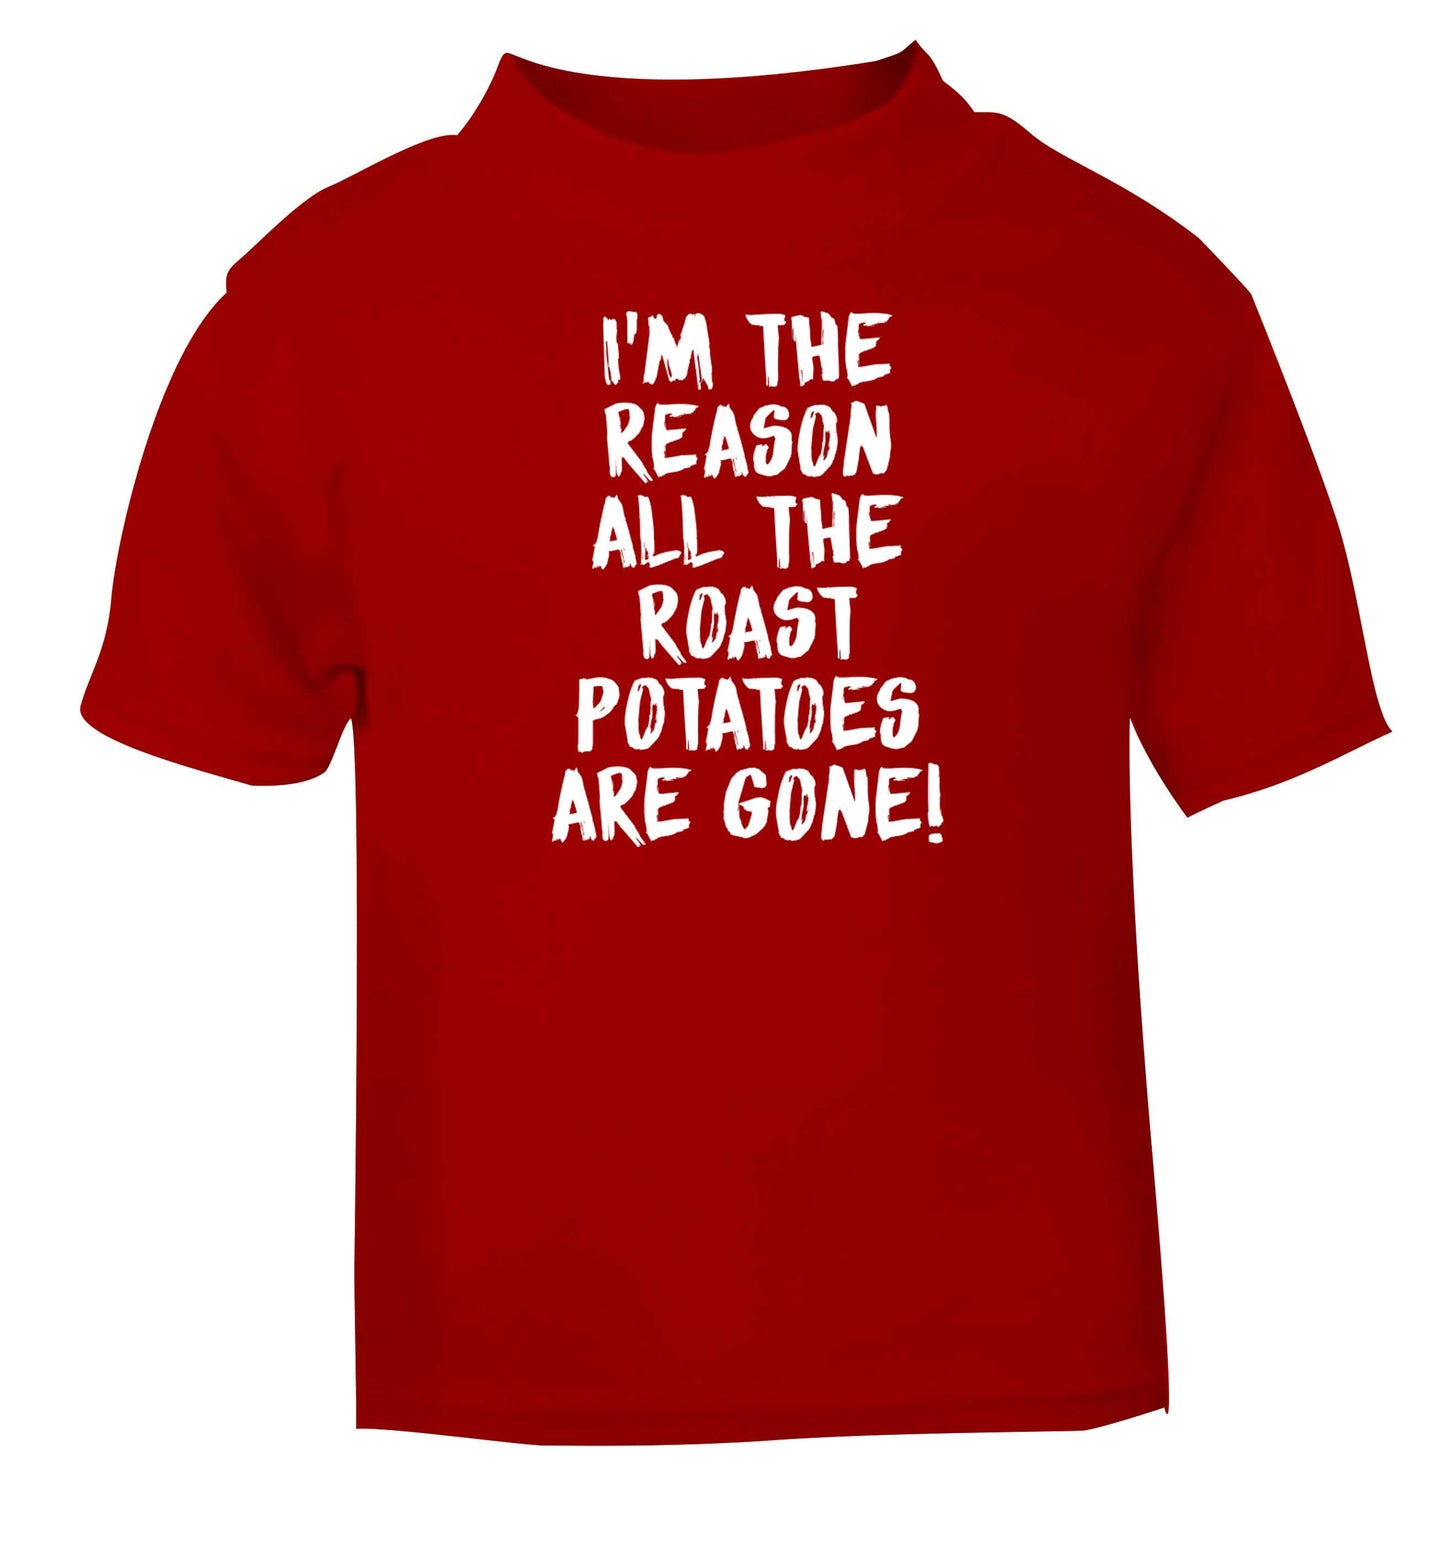 I'm the reason all the roast potatoes are gone red baby toddler Tshirt 2 Years